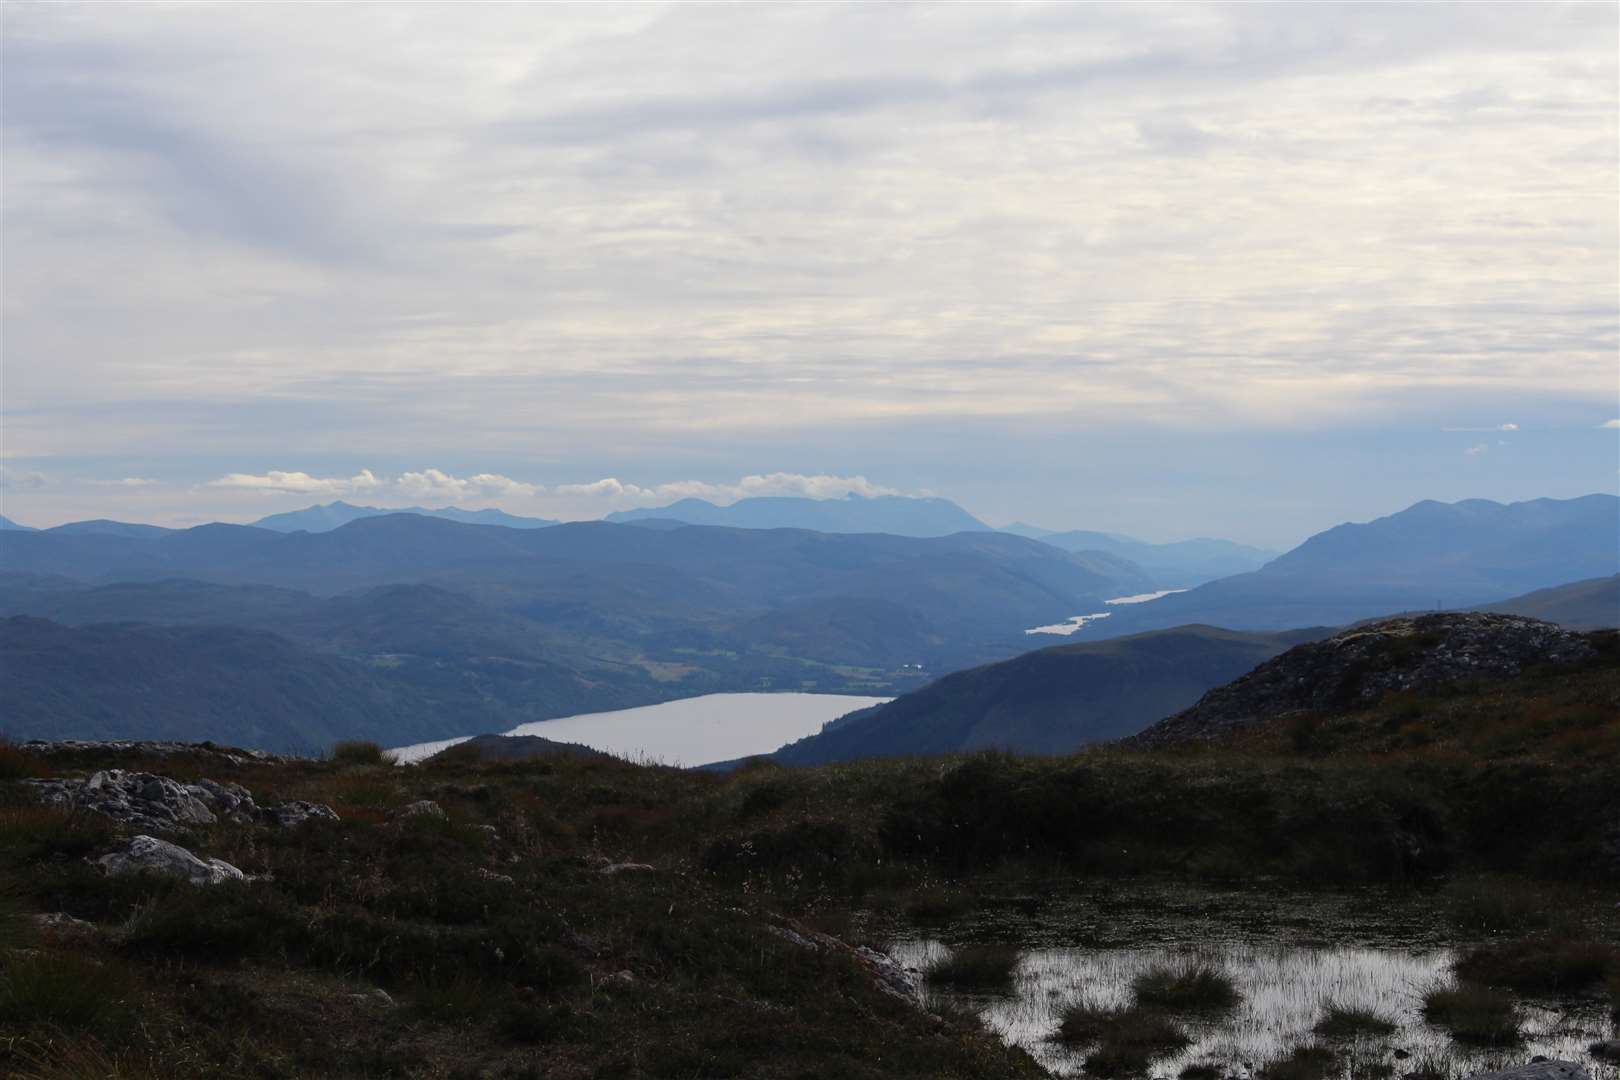 Ben Nevis's summit is clipped by cloud in this view south down the Great Glen.